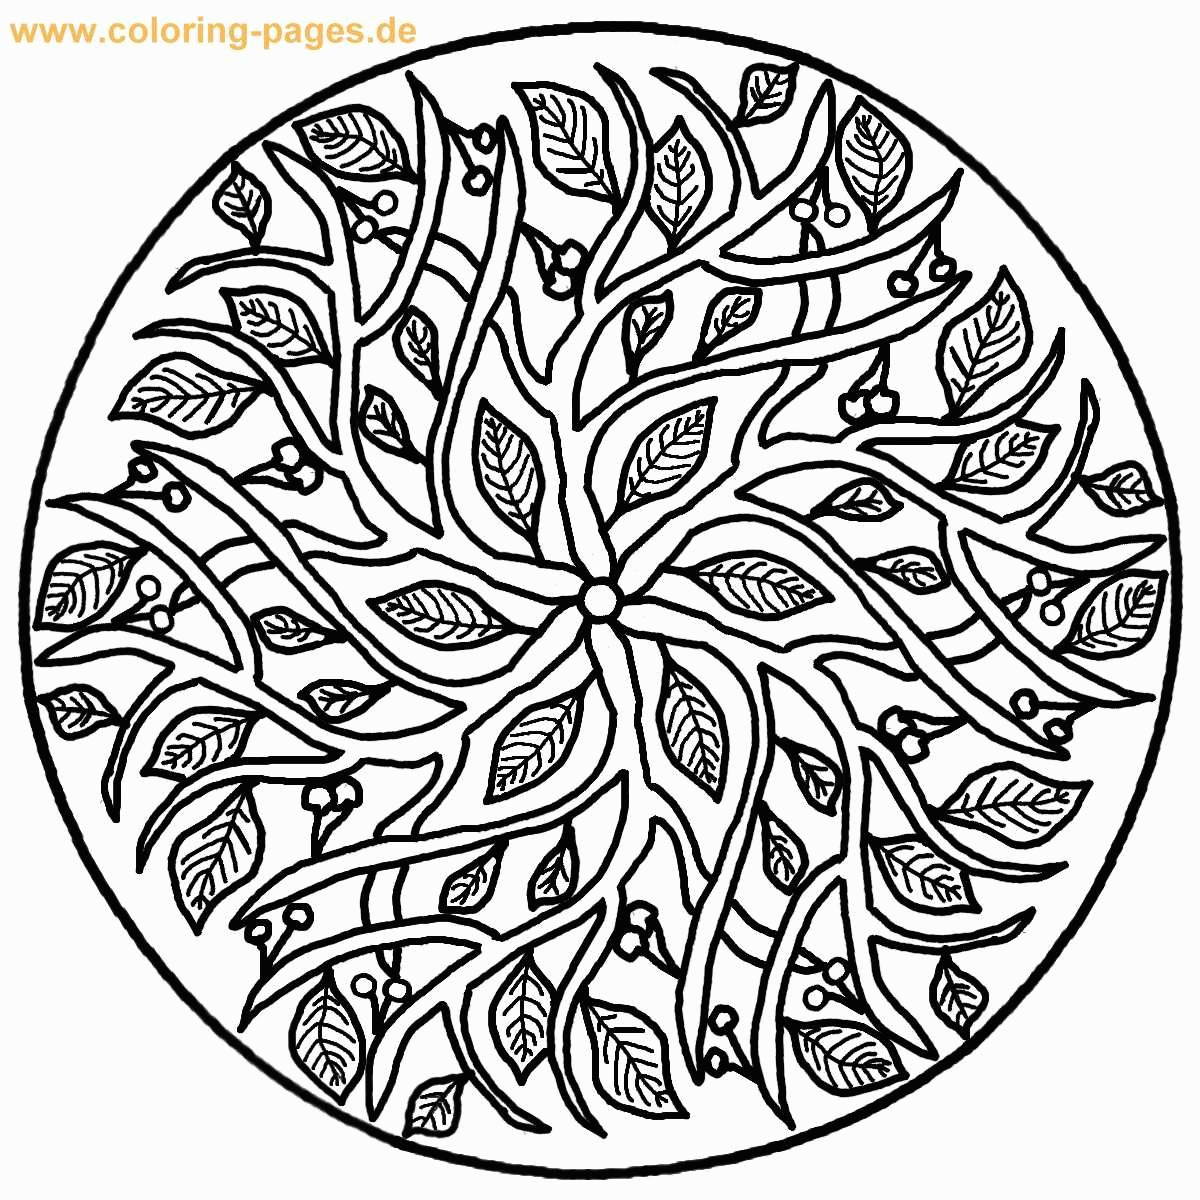 Printable Hard Coloring Pages For S - High Quality Coloring Pages